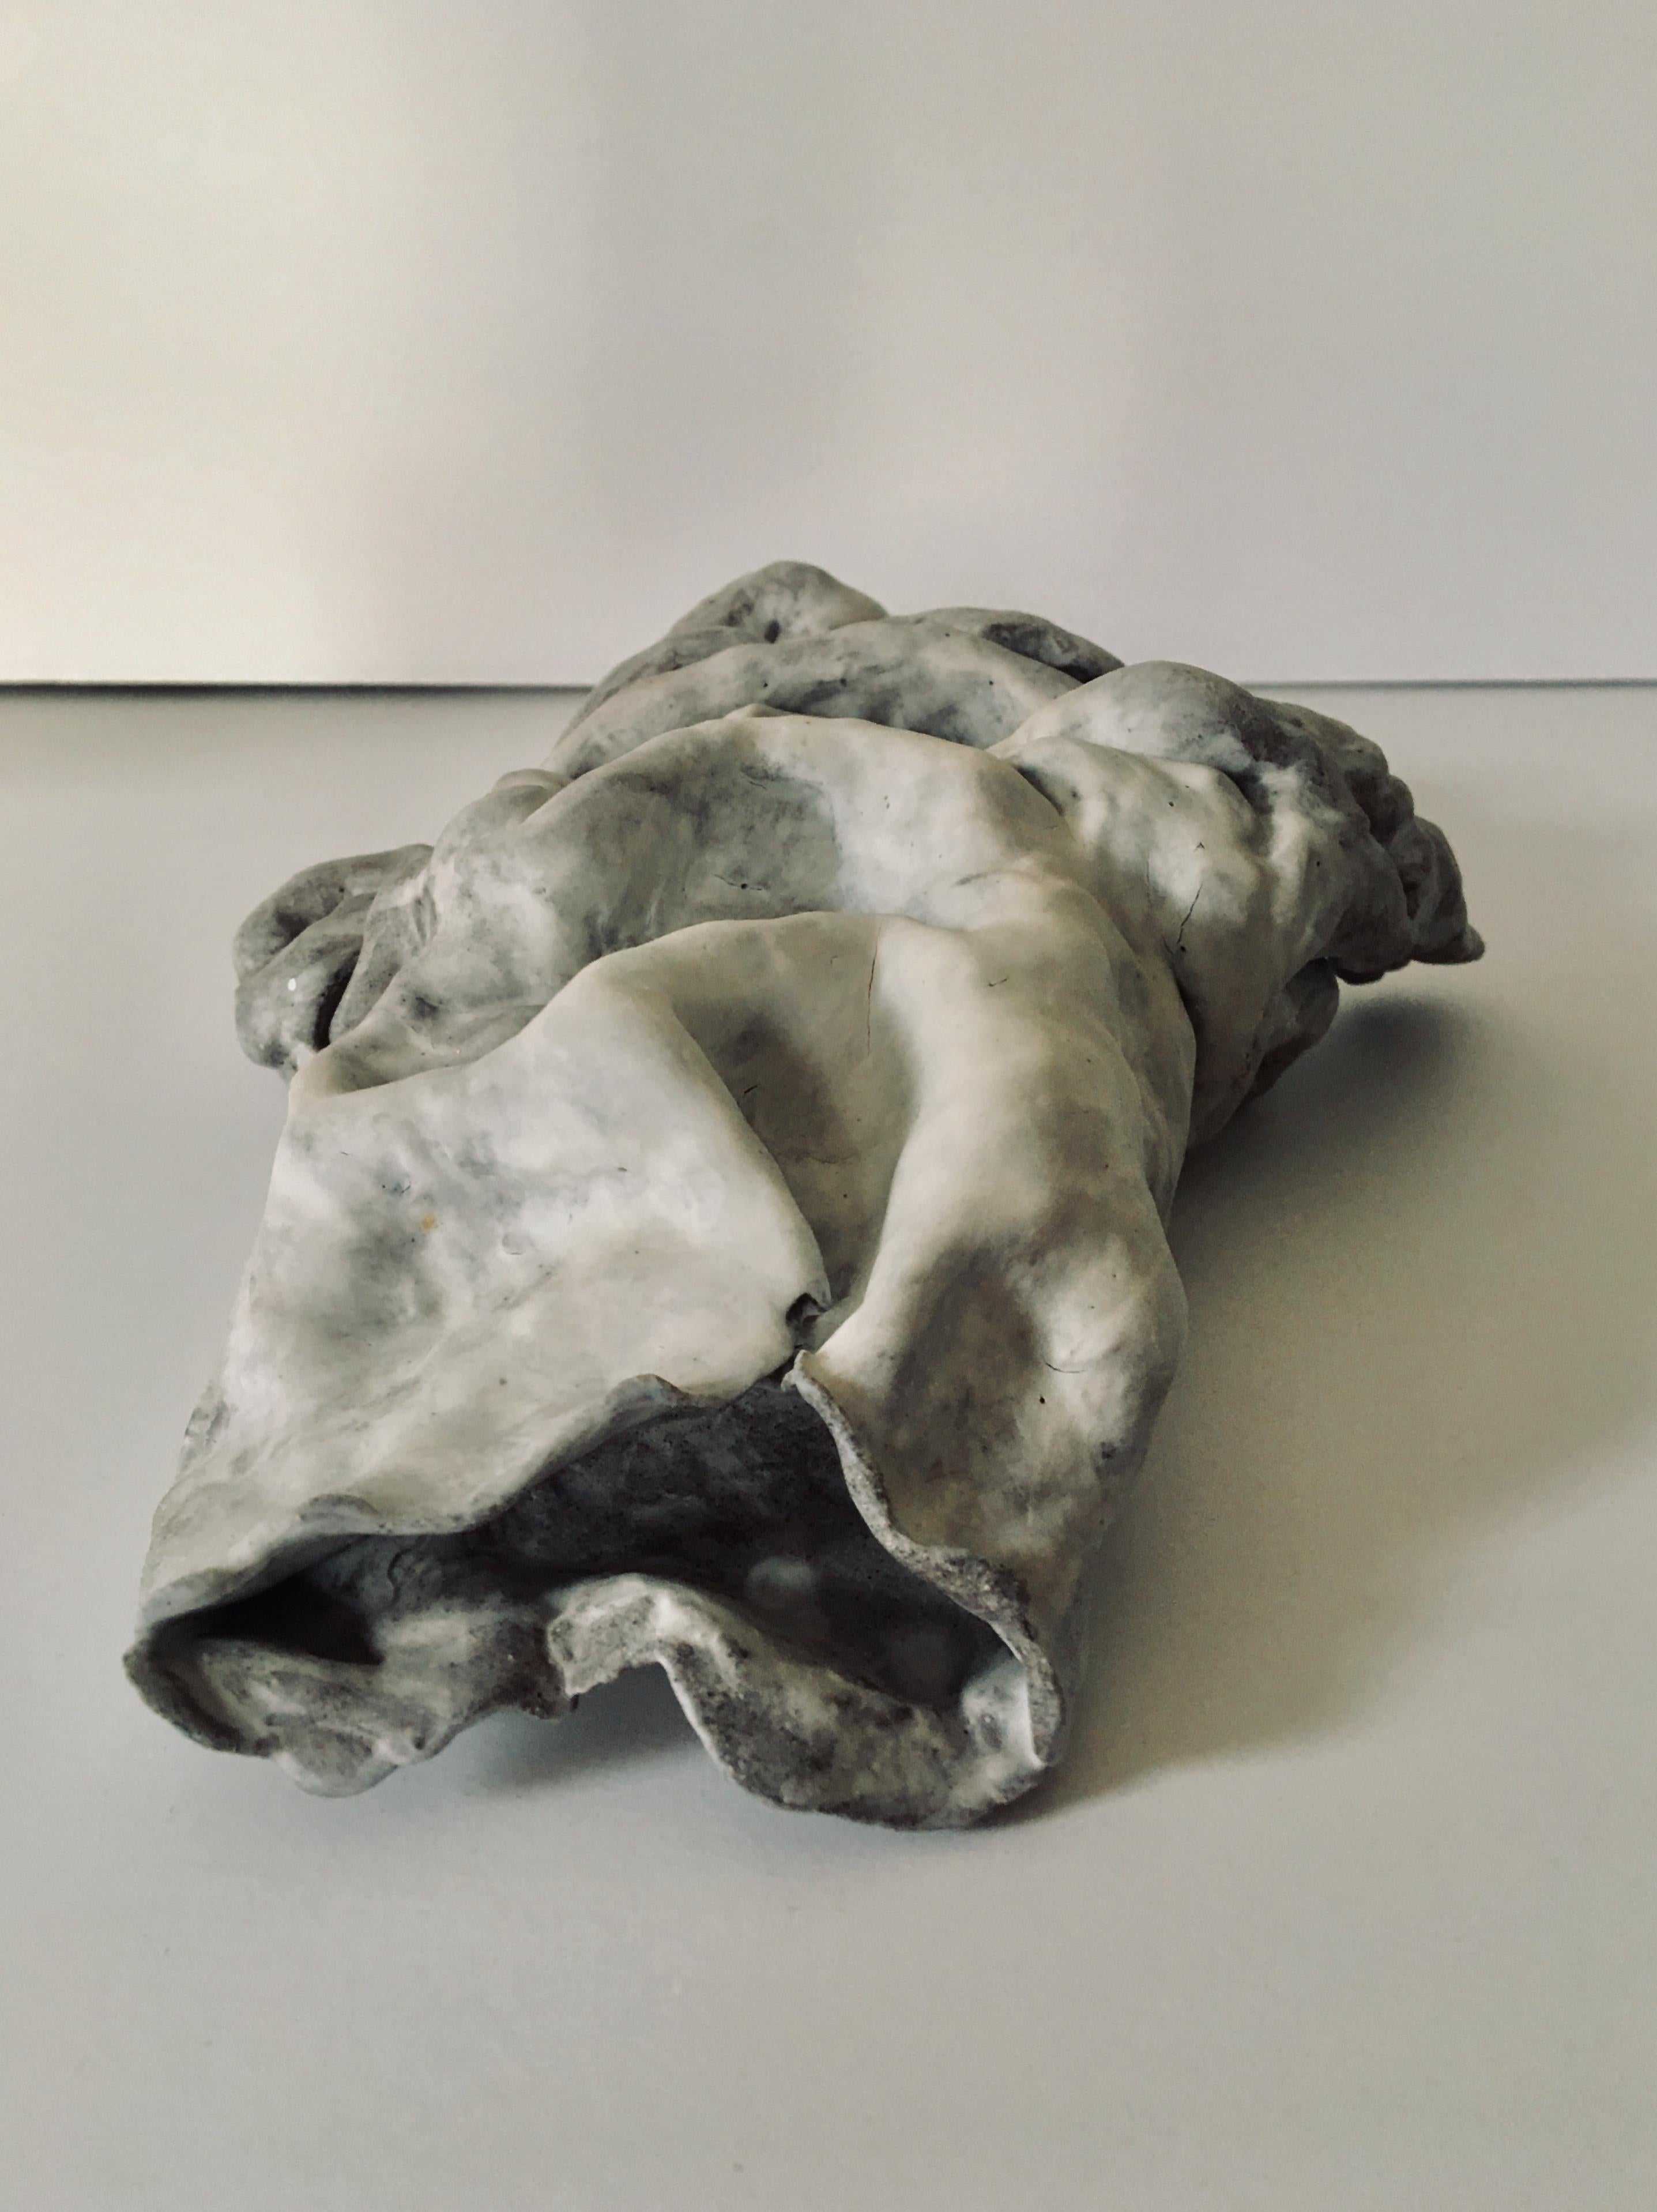 Ceramic figure lying down, sculpture: Figurative 'Wasted' 4